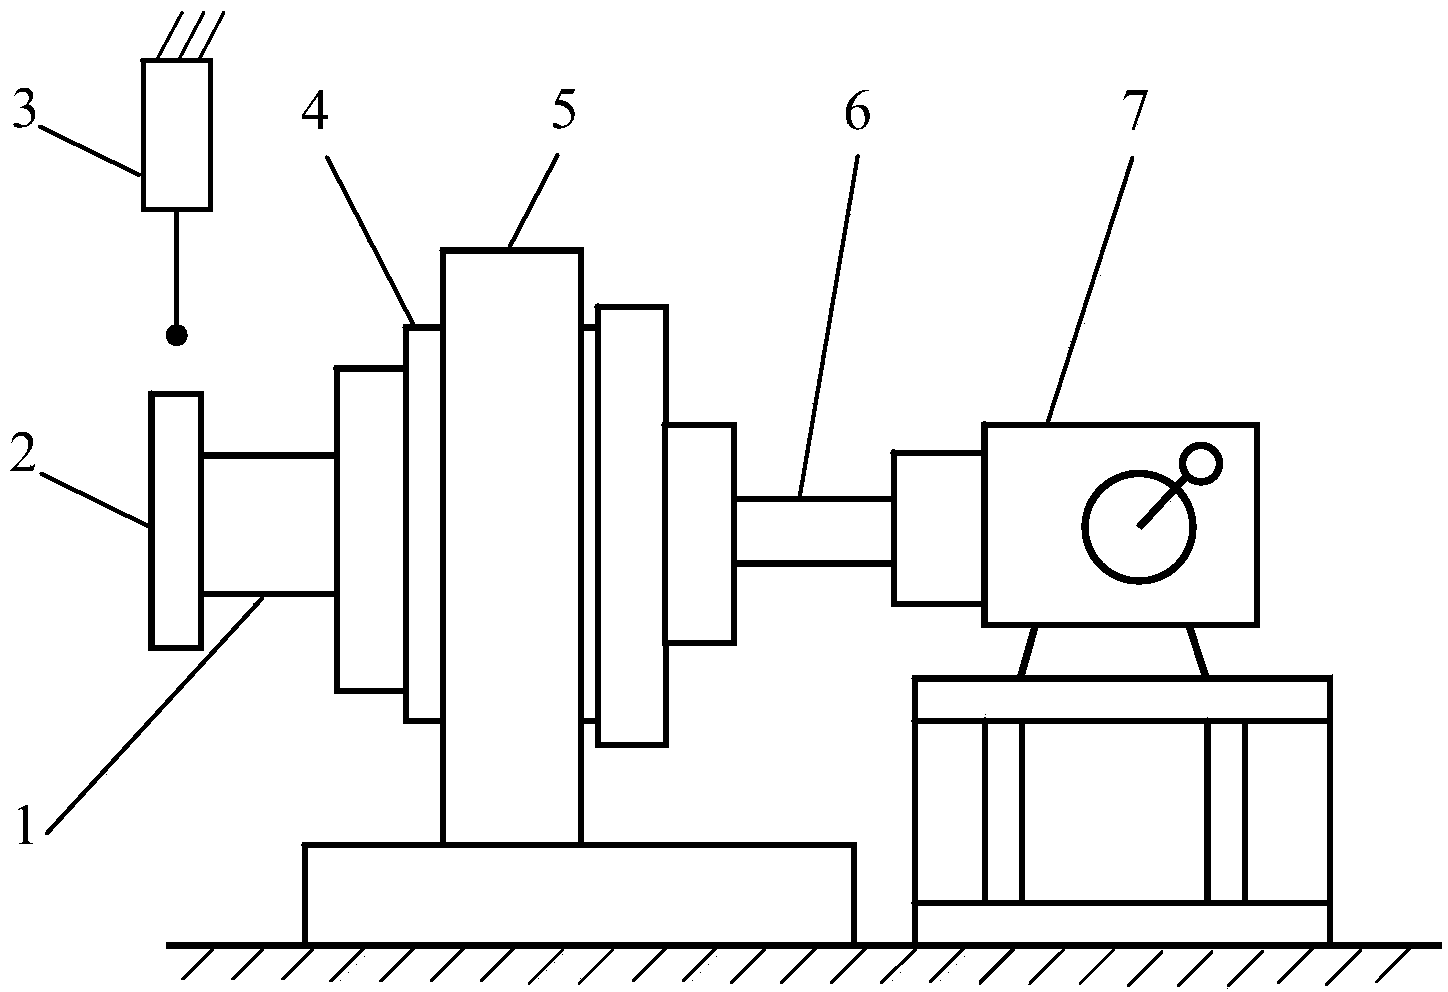 Experiment table and method for testing transmission errors of high-speed-ratio high-precision speed reducer